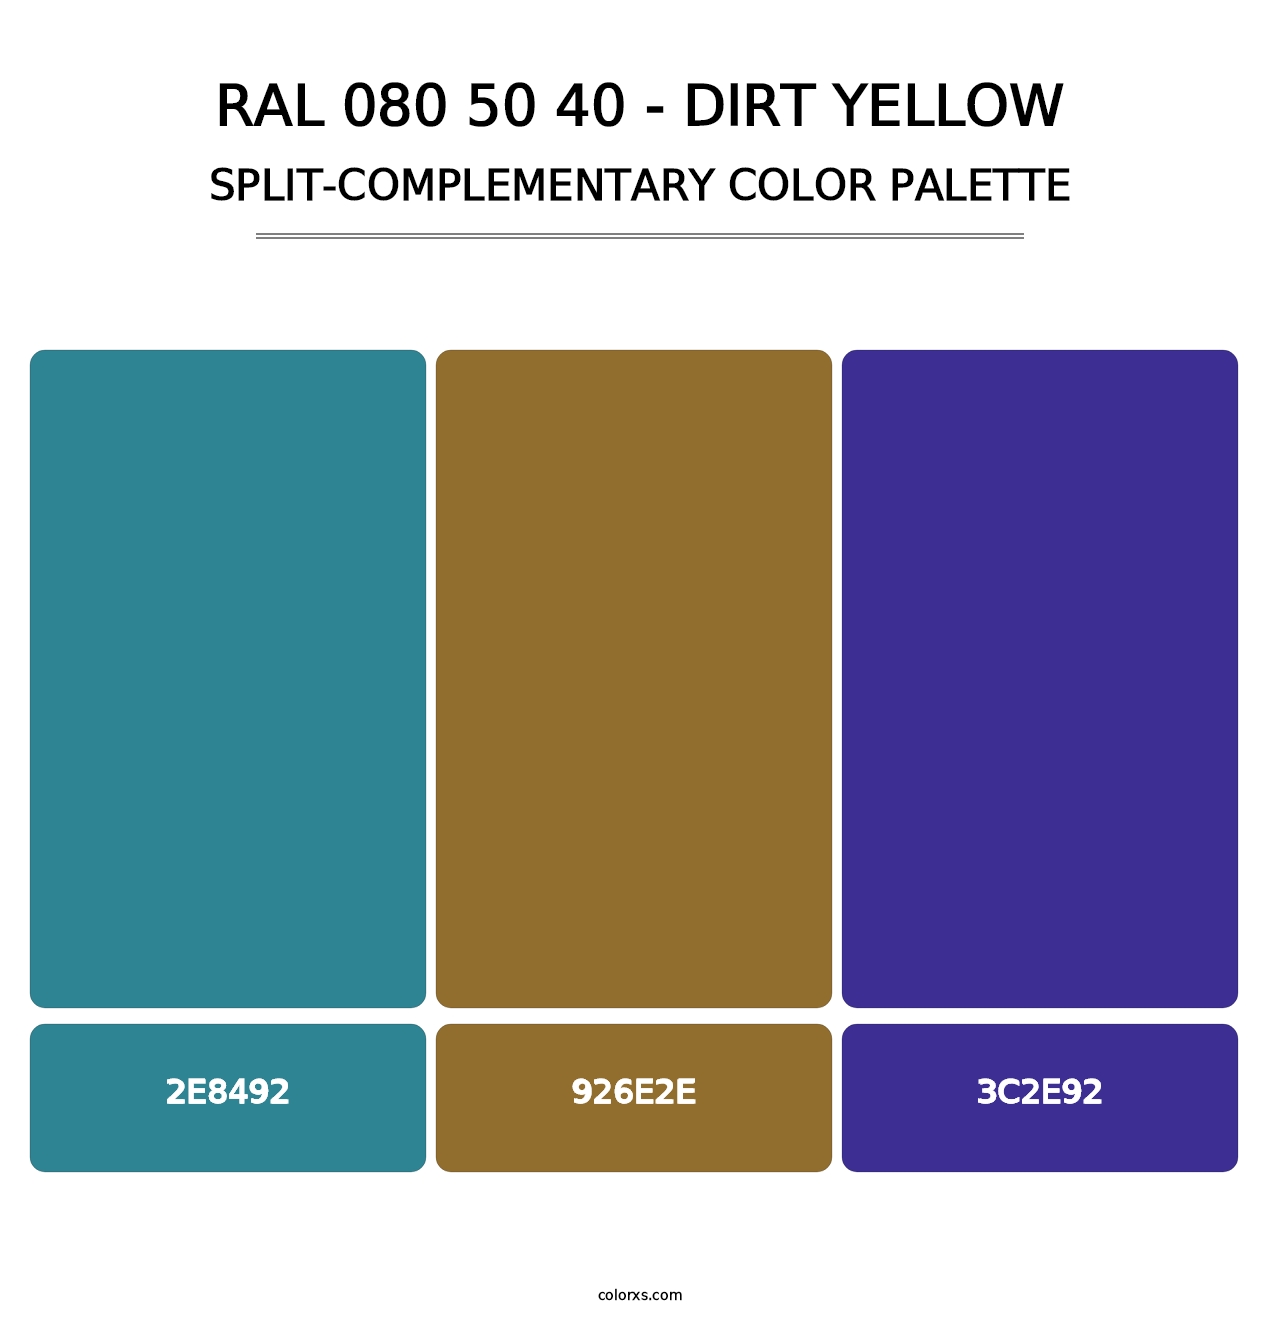 RAL 080 50 40 - Dirt Yellow - Split-Complementary Color Palette